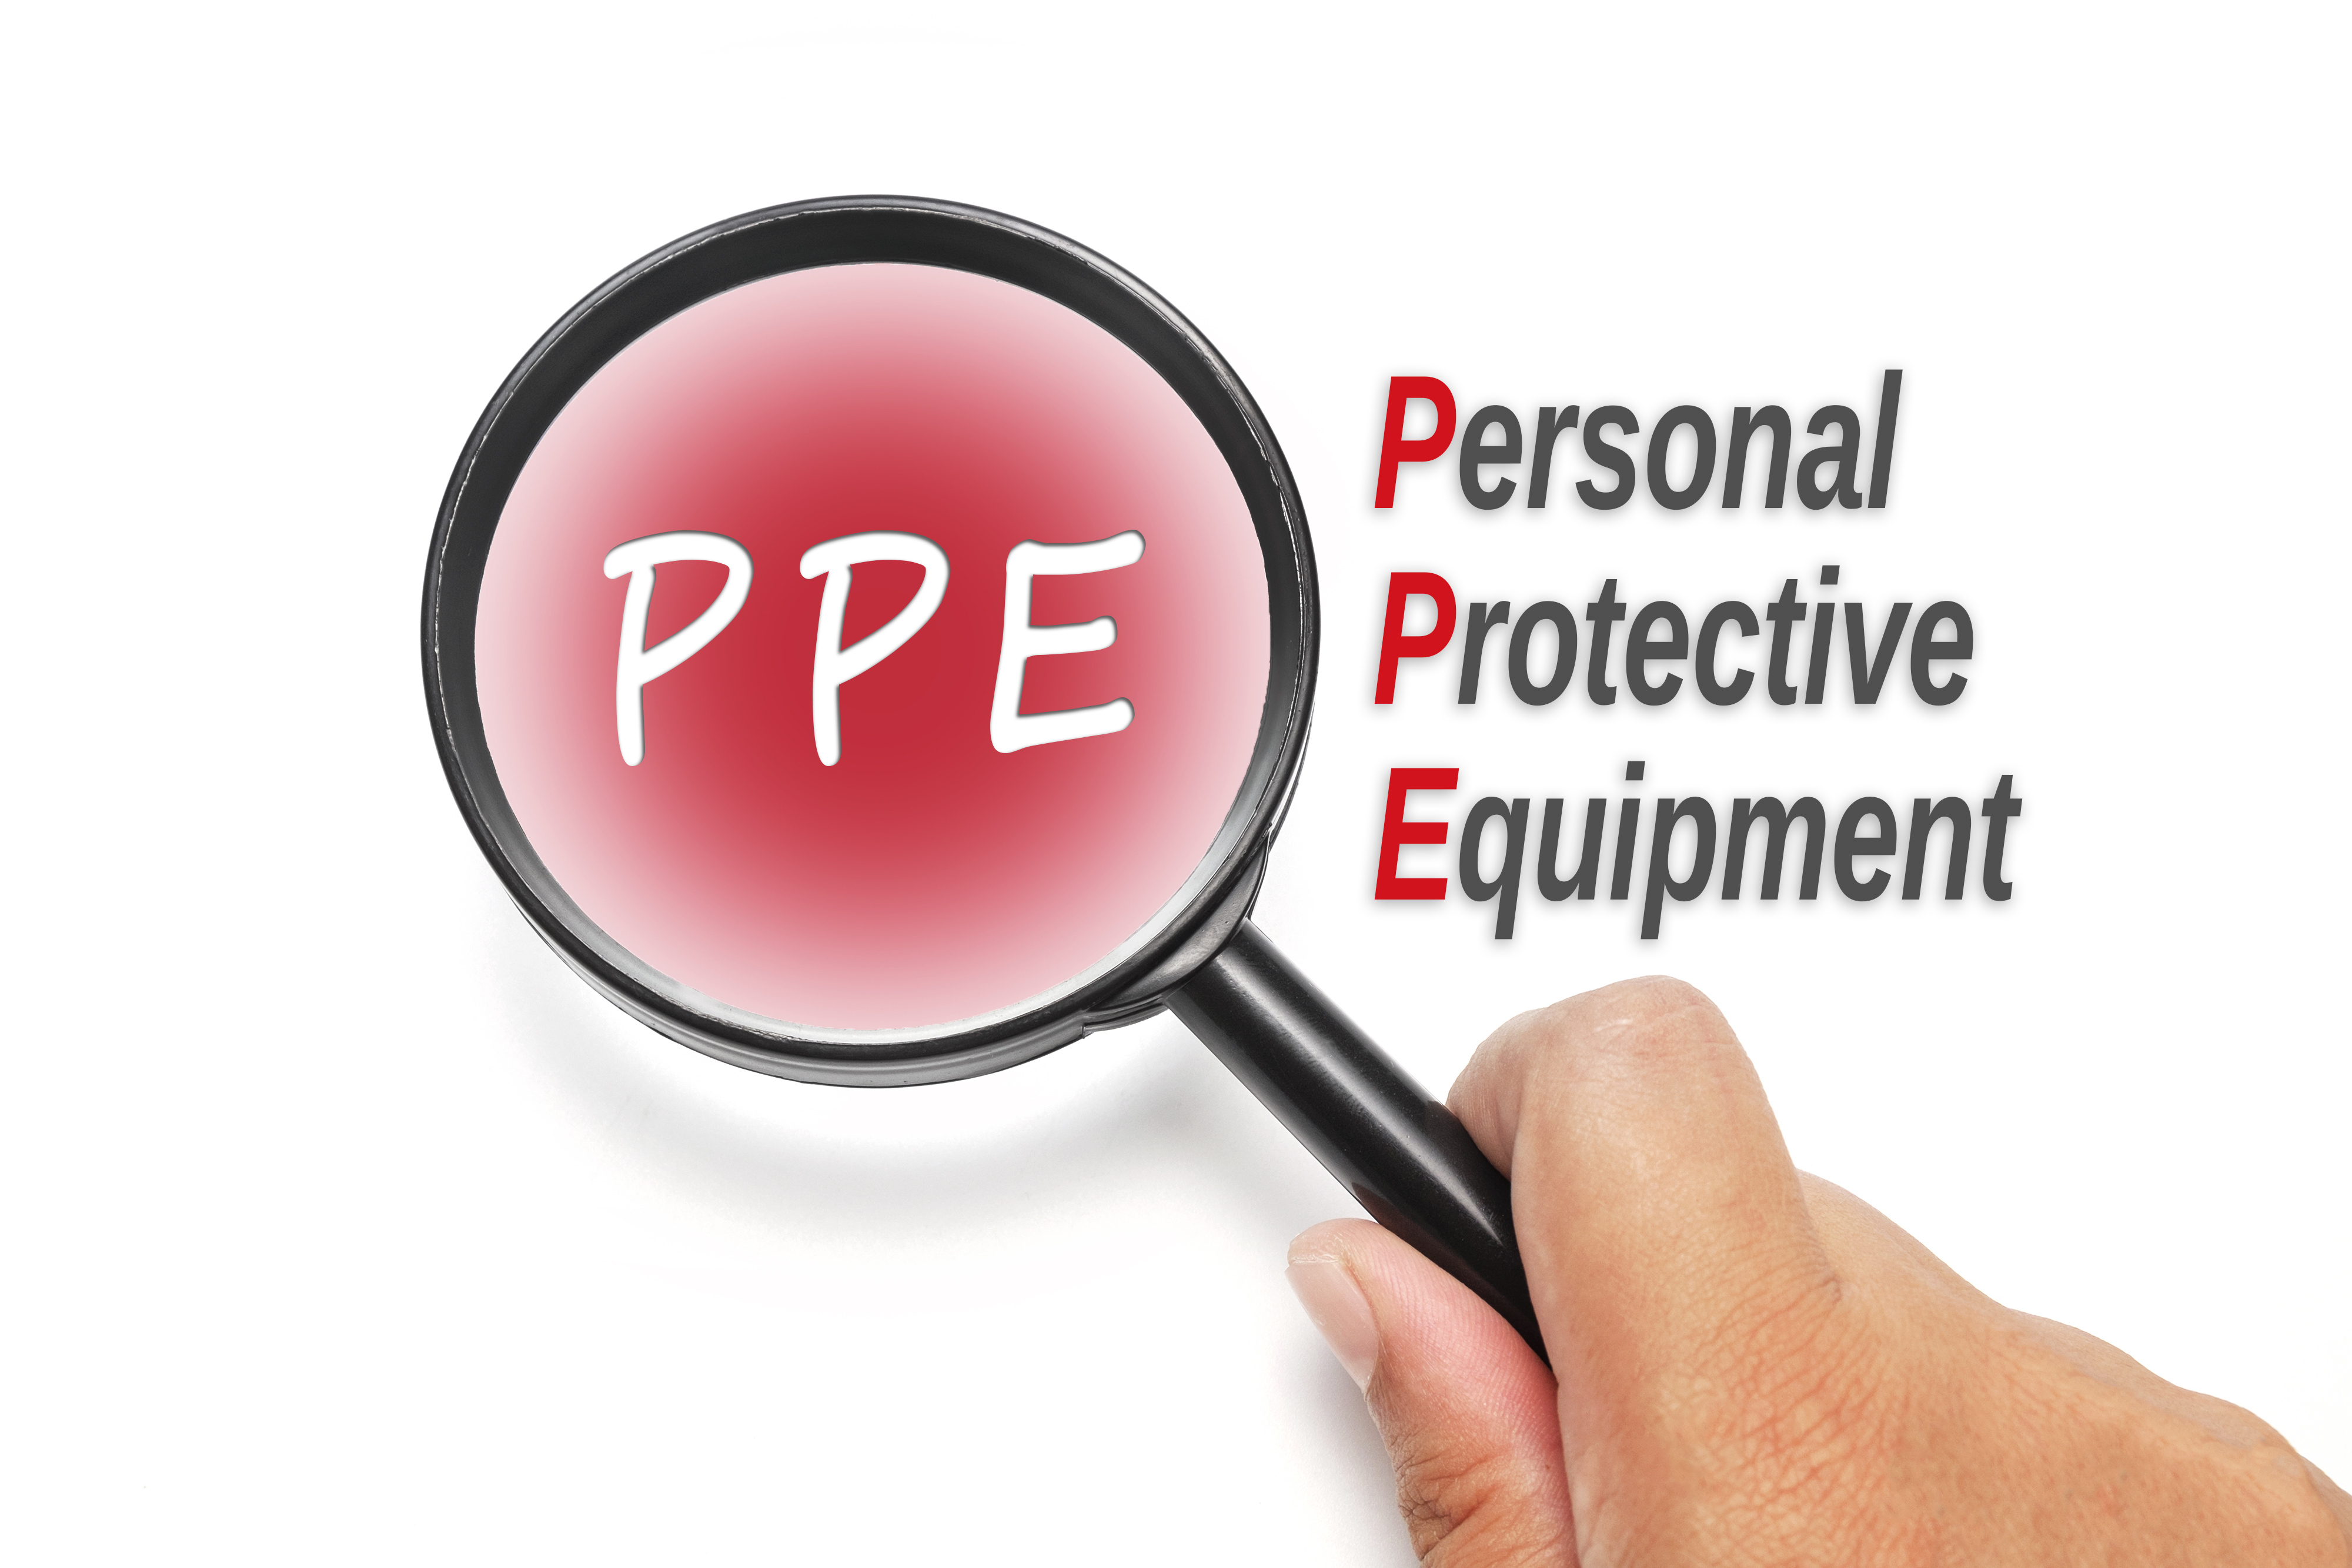 PPE: Definition, Meaning, Gear, and Equipment | MCR Safety Info Blog